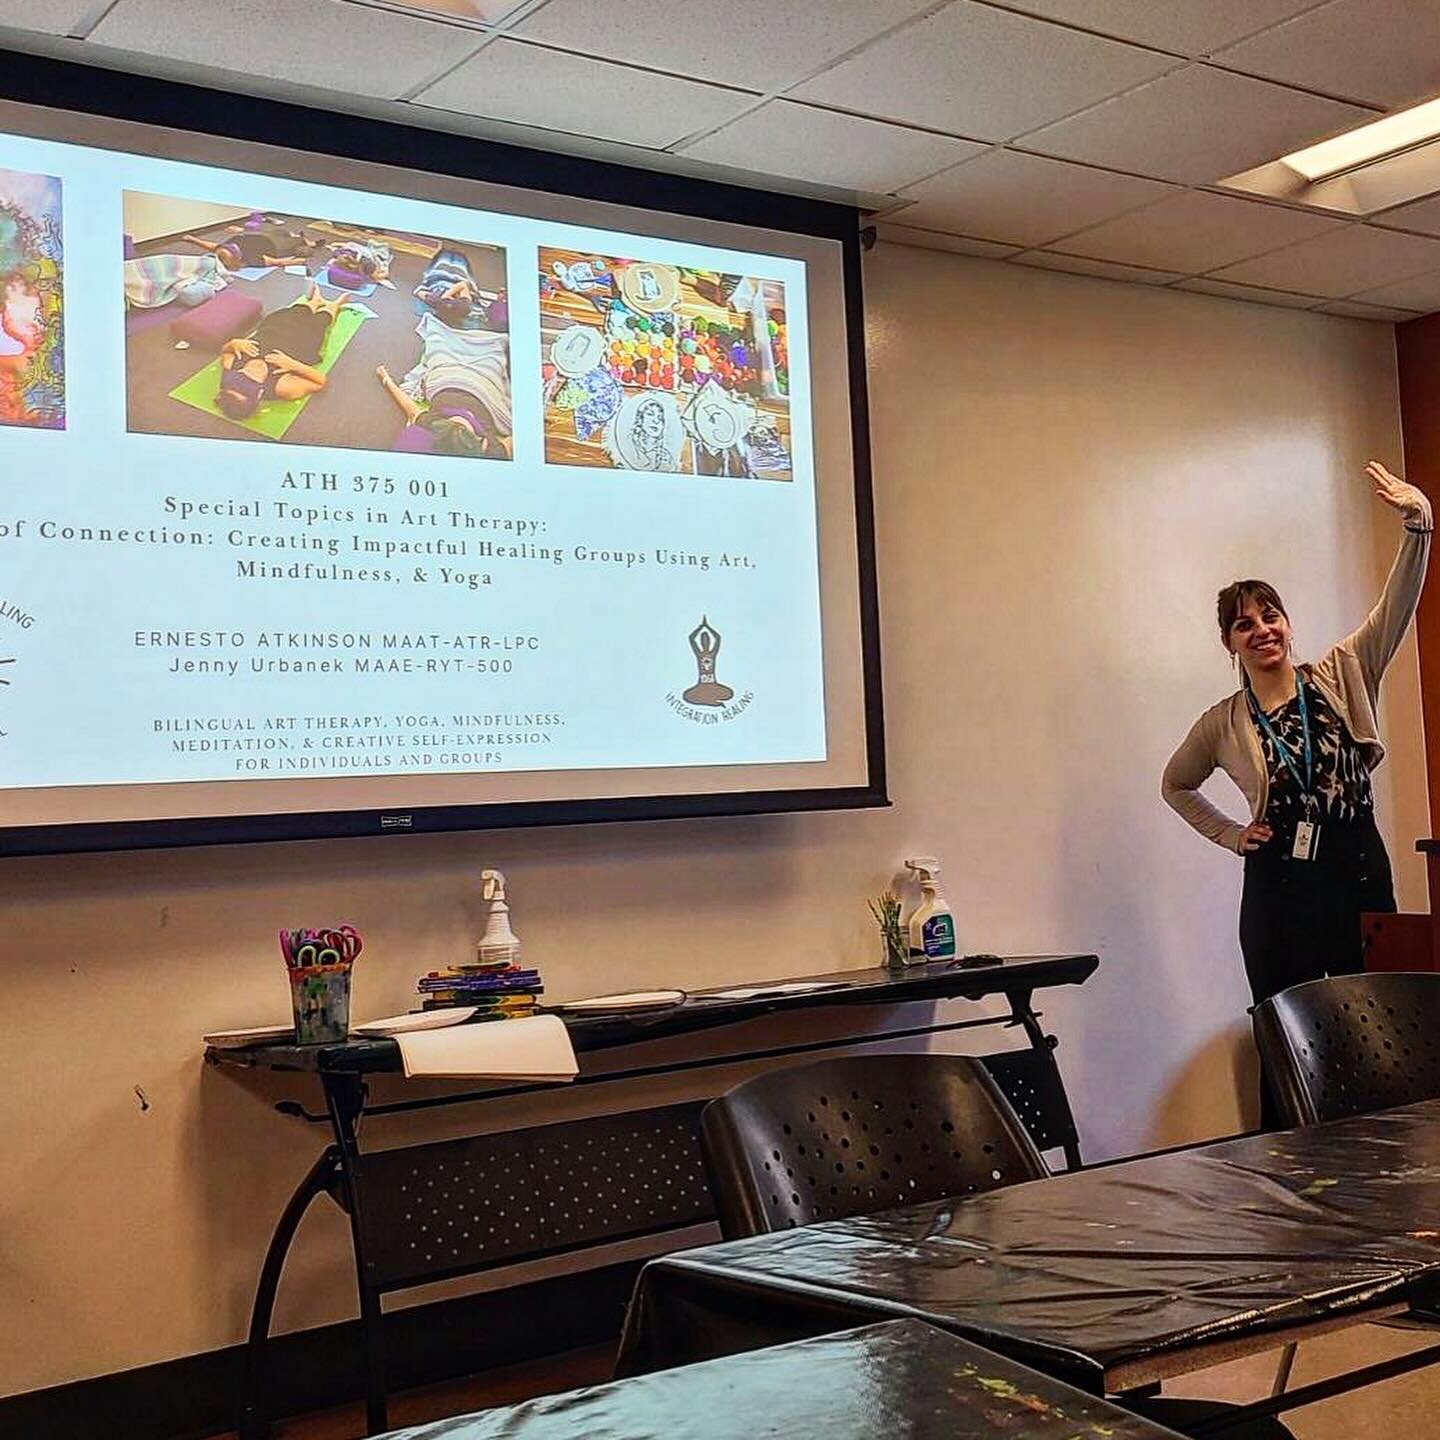 Dream come true this weekend teaching a weekend course at @mountmaryuniversity for art therapy undergrads in the art of connection: creating impactful healing groups through art and yoga techniques. Such an honor to teach others using methods and str